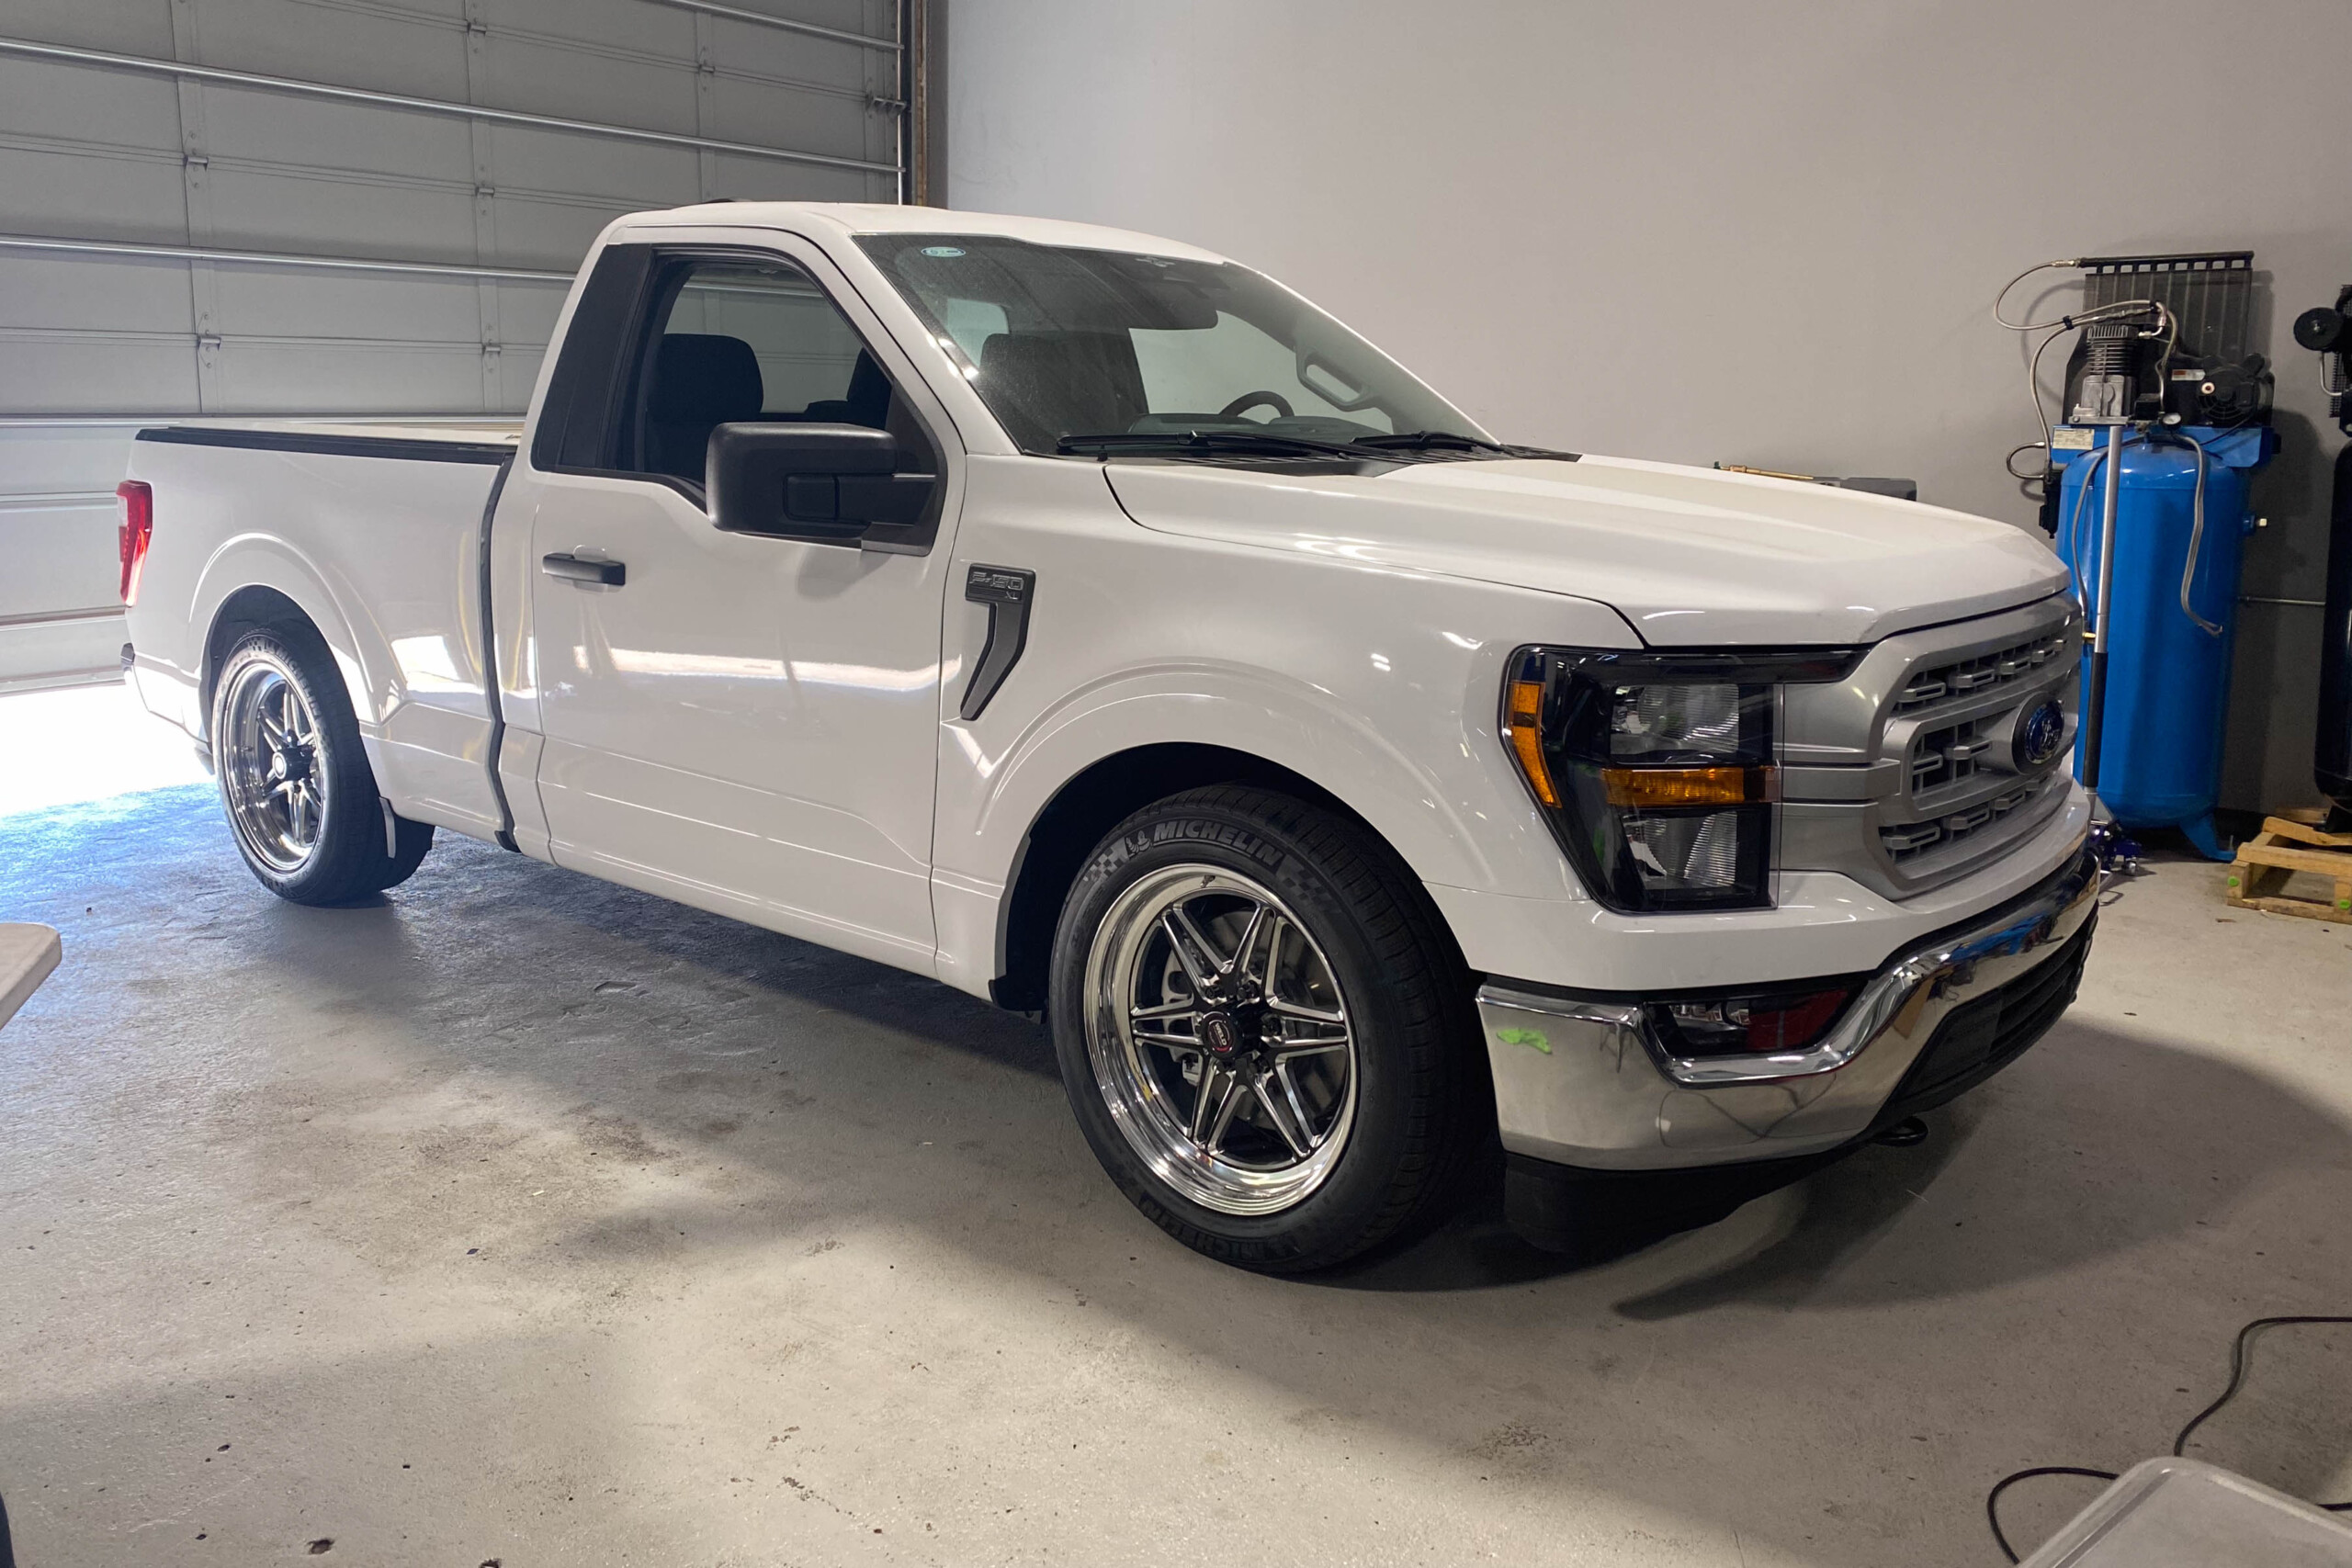 Precursor To Power: Fueling Your 2015-2023 Ford F-150